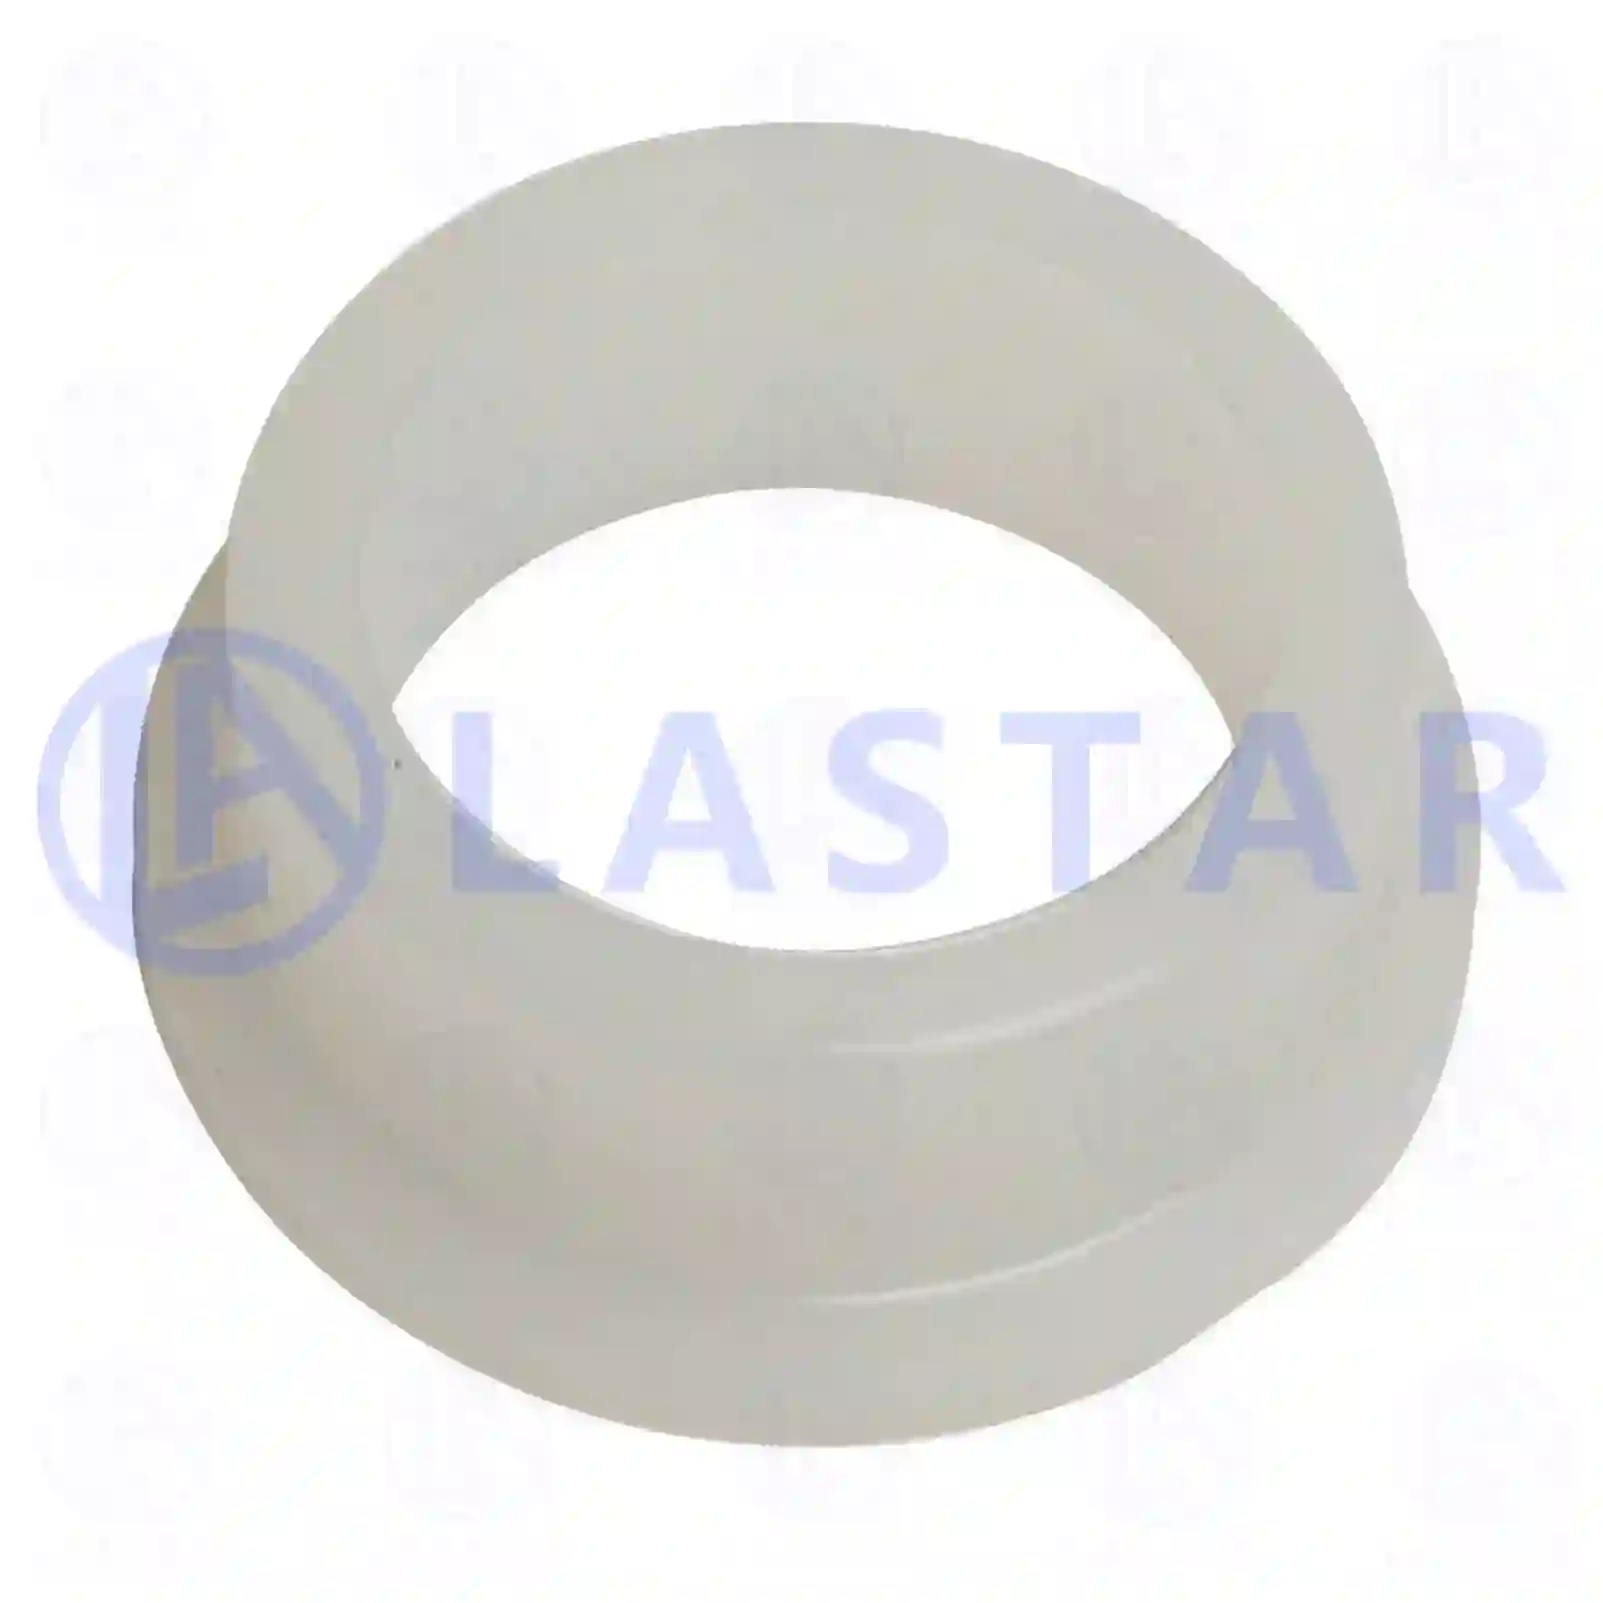 Bushing, stabilizer, 77728148, 6203230350, , , ||  77728148 Lastar Spare Part | Truck Spare Parts, Auotomotive Spare Parts Bushing, stabilizer, 77728148, 6203230350, , , ||  77728148 Lastar Spare Part | Truck Spare Parts, Auotomotive Spare Parts